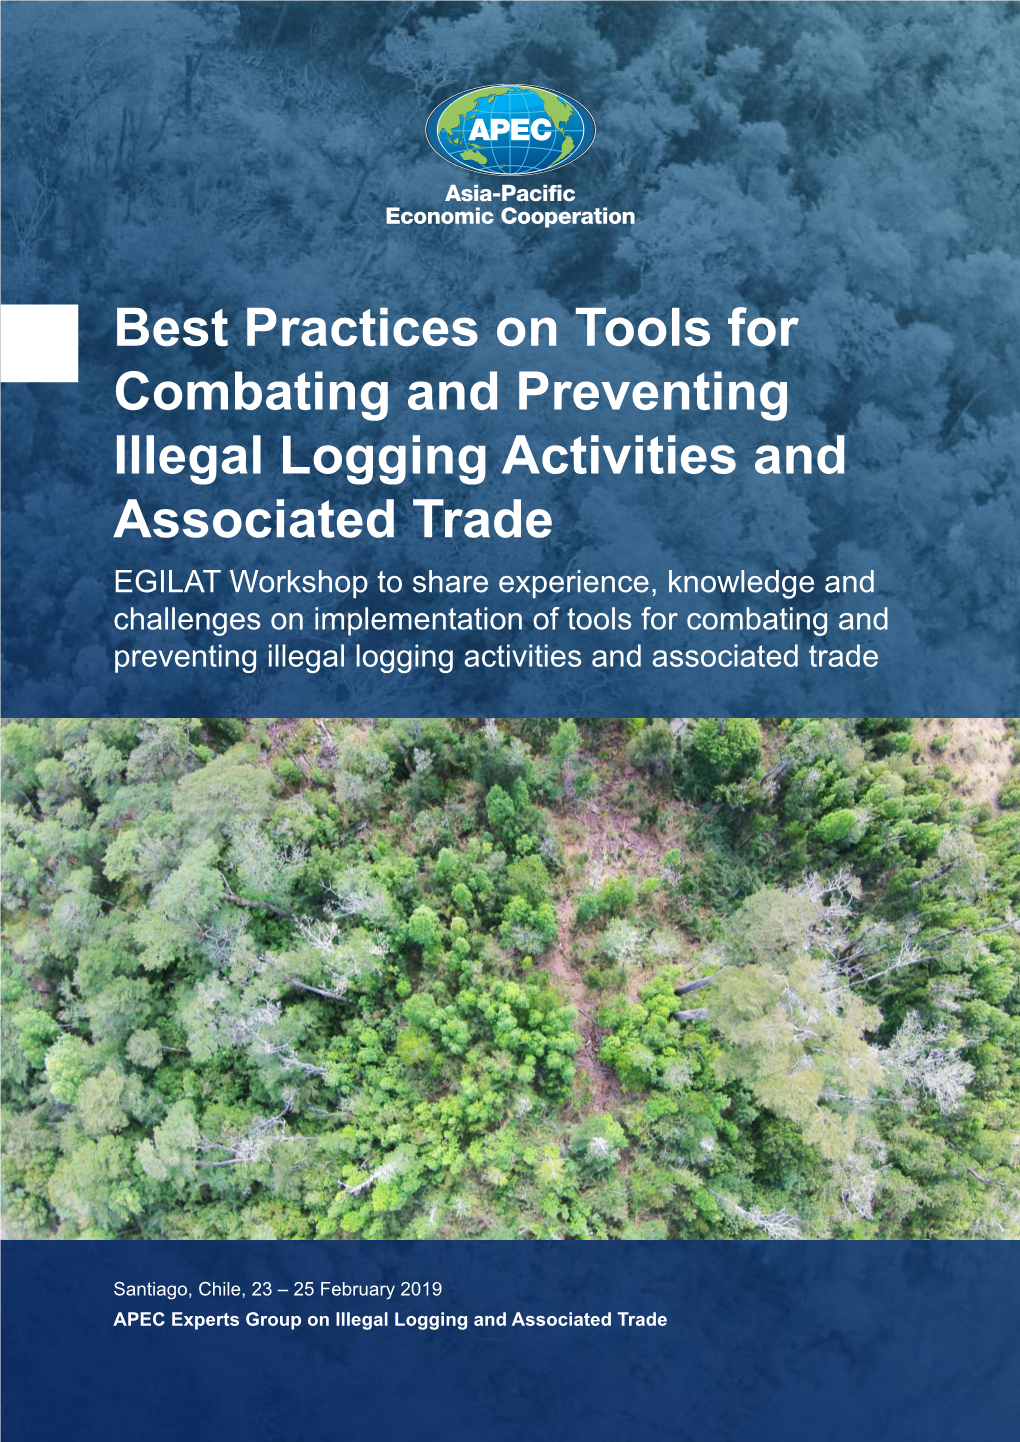 Best Practices on Tools for Combating and Preventing Illegal Logging